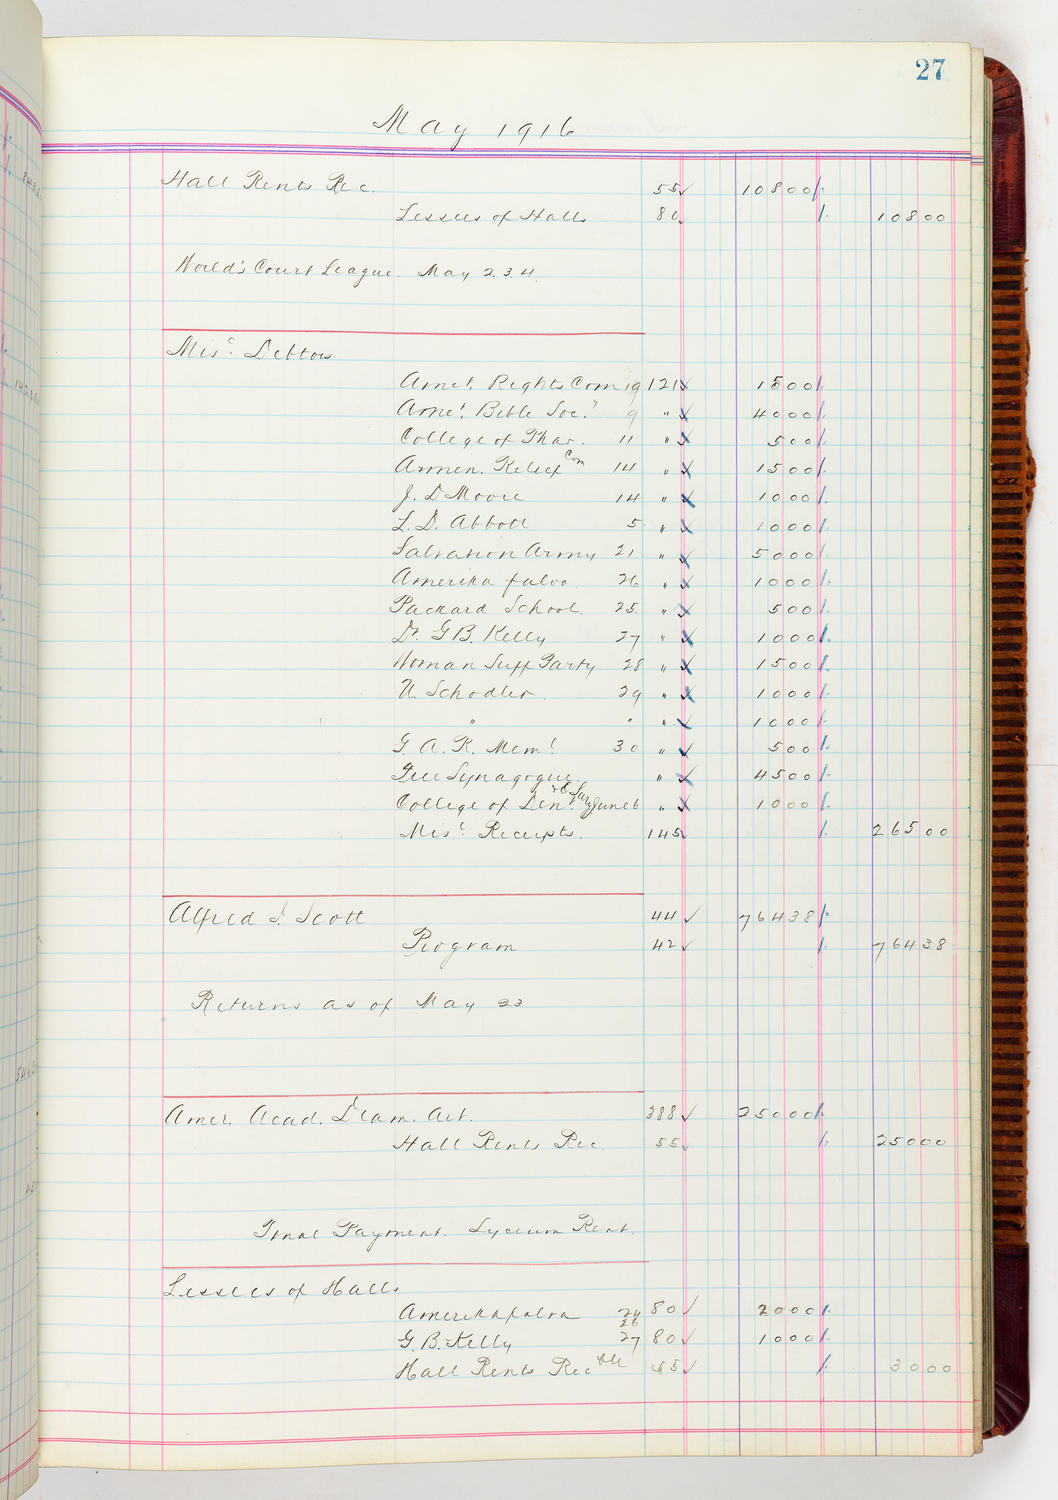 Music Hall Accounting Ledger, volume 5, page 27